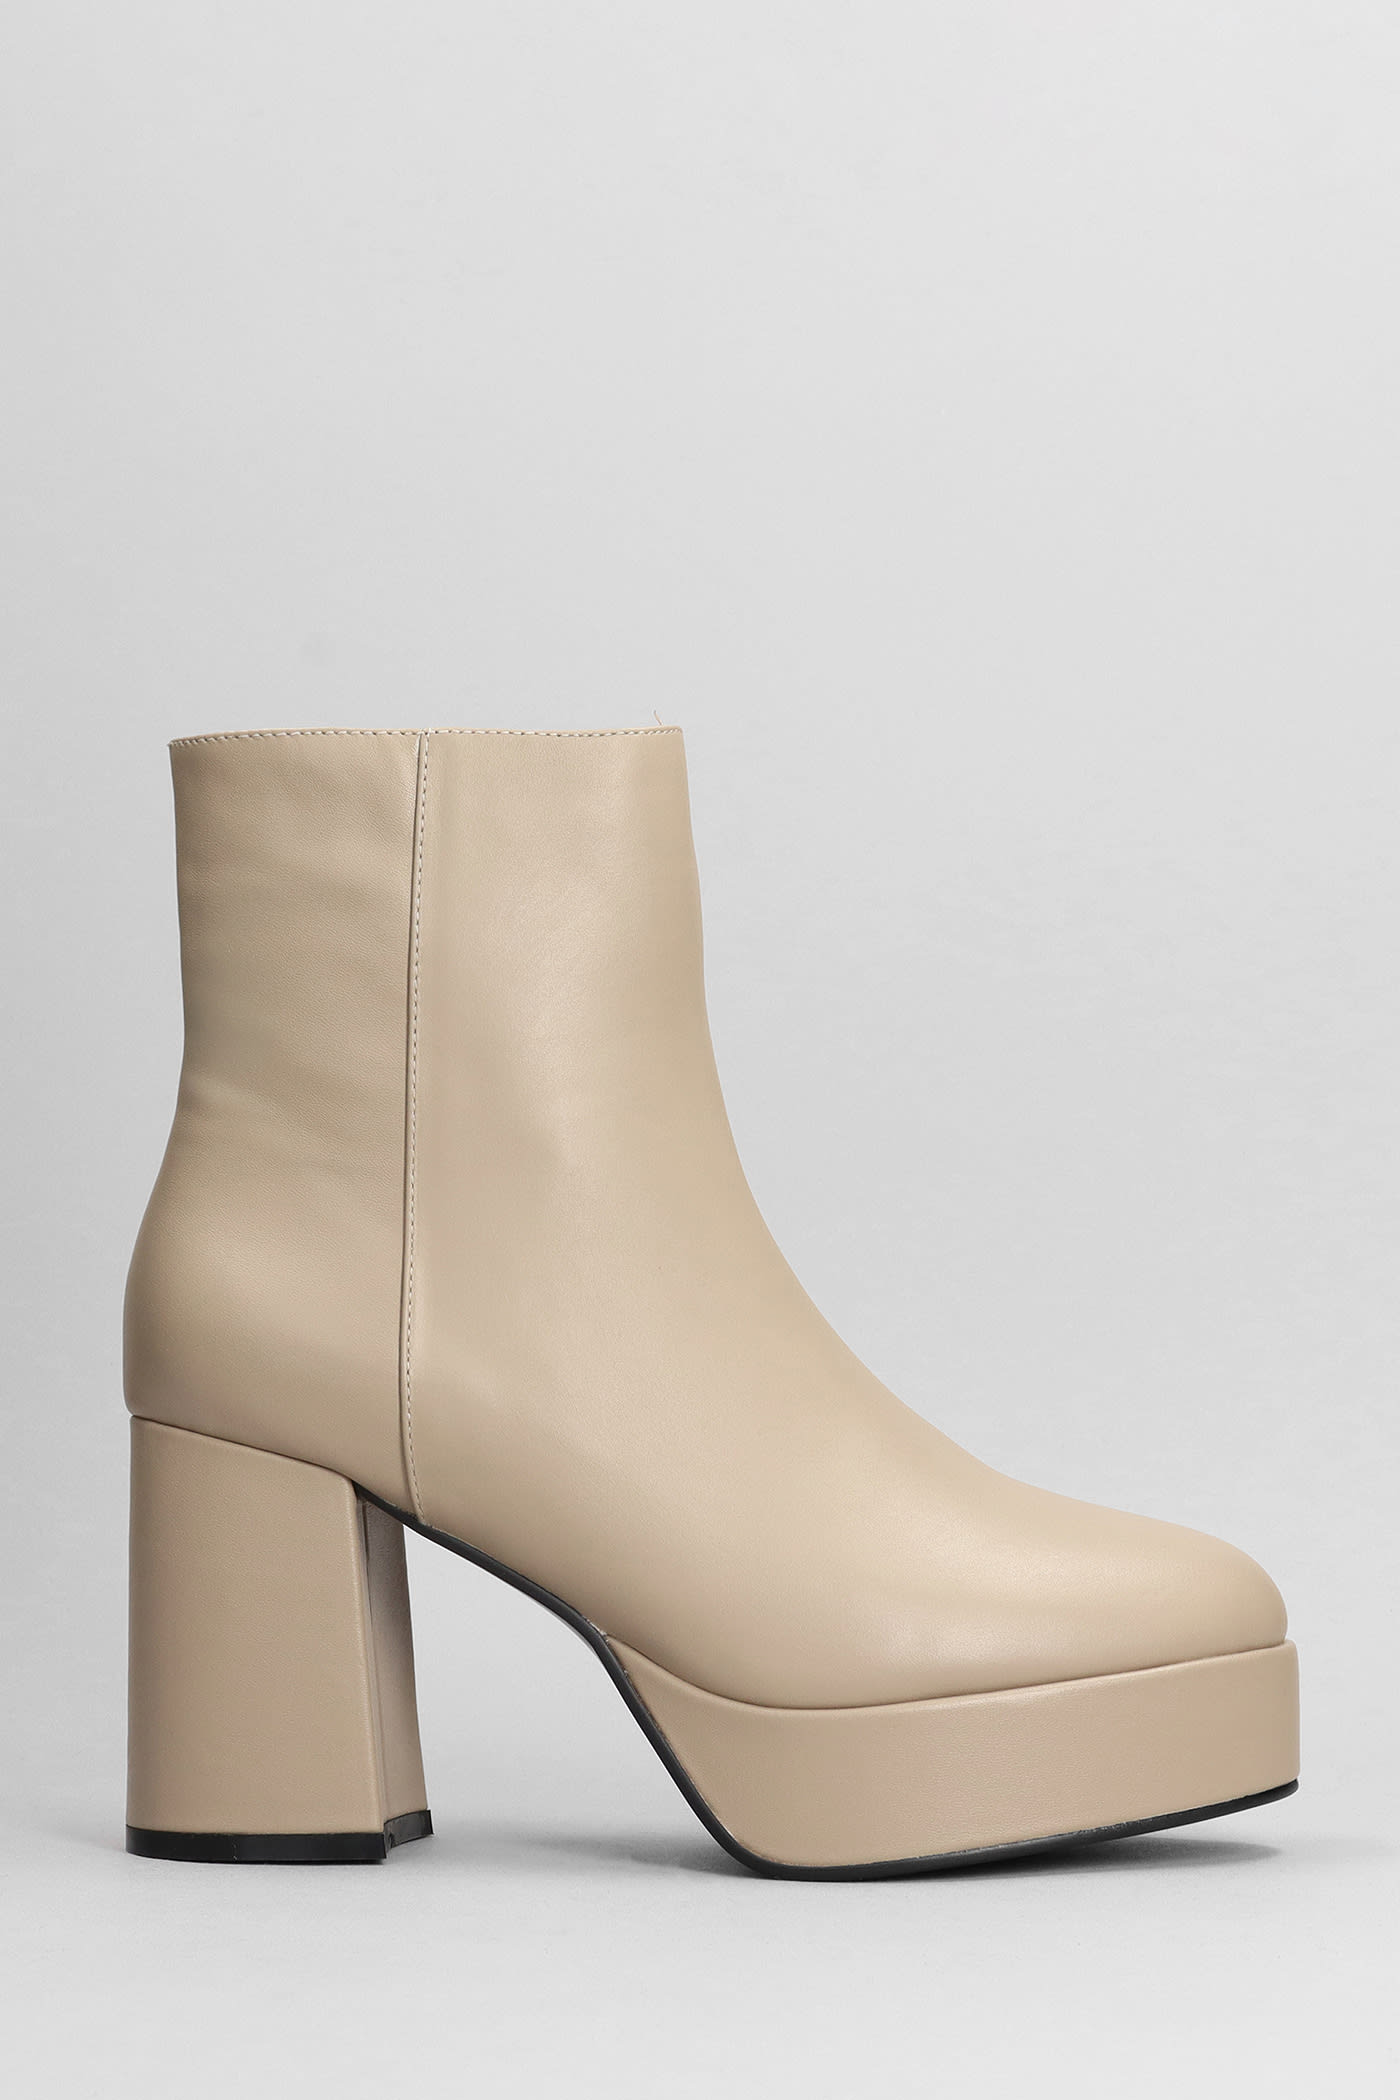 High Heels Ankle Boots In Taupe Leather